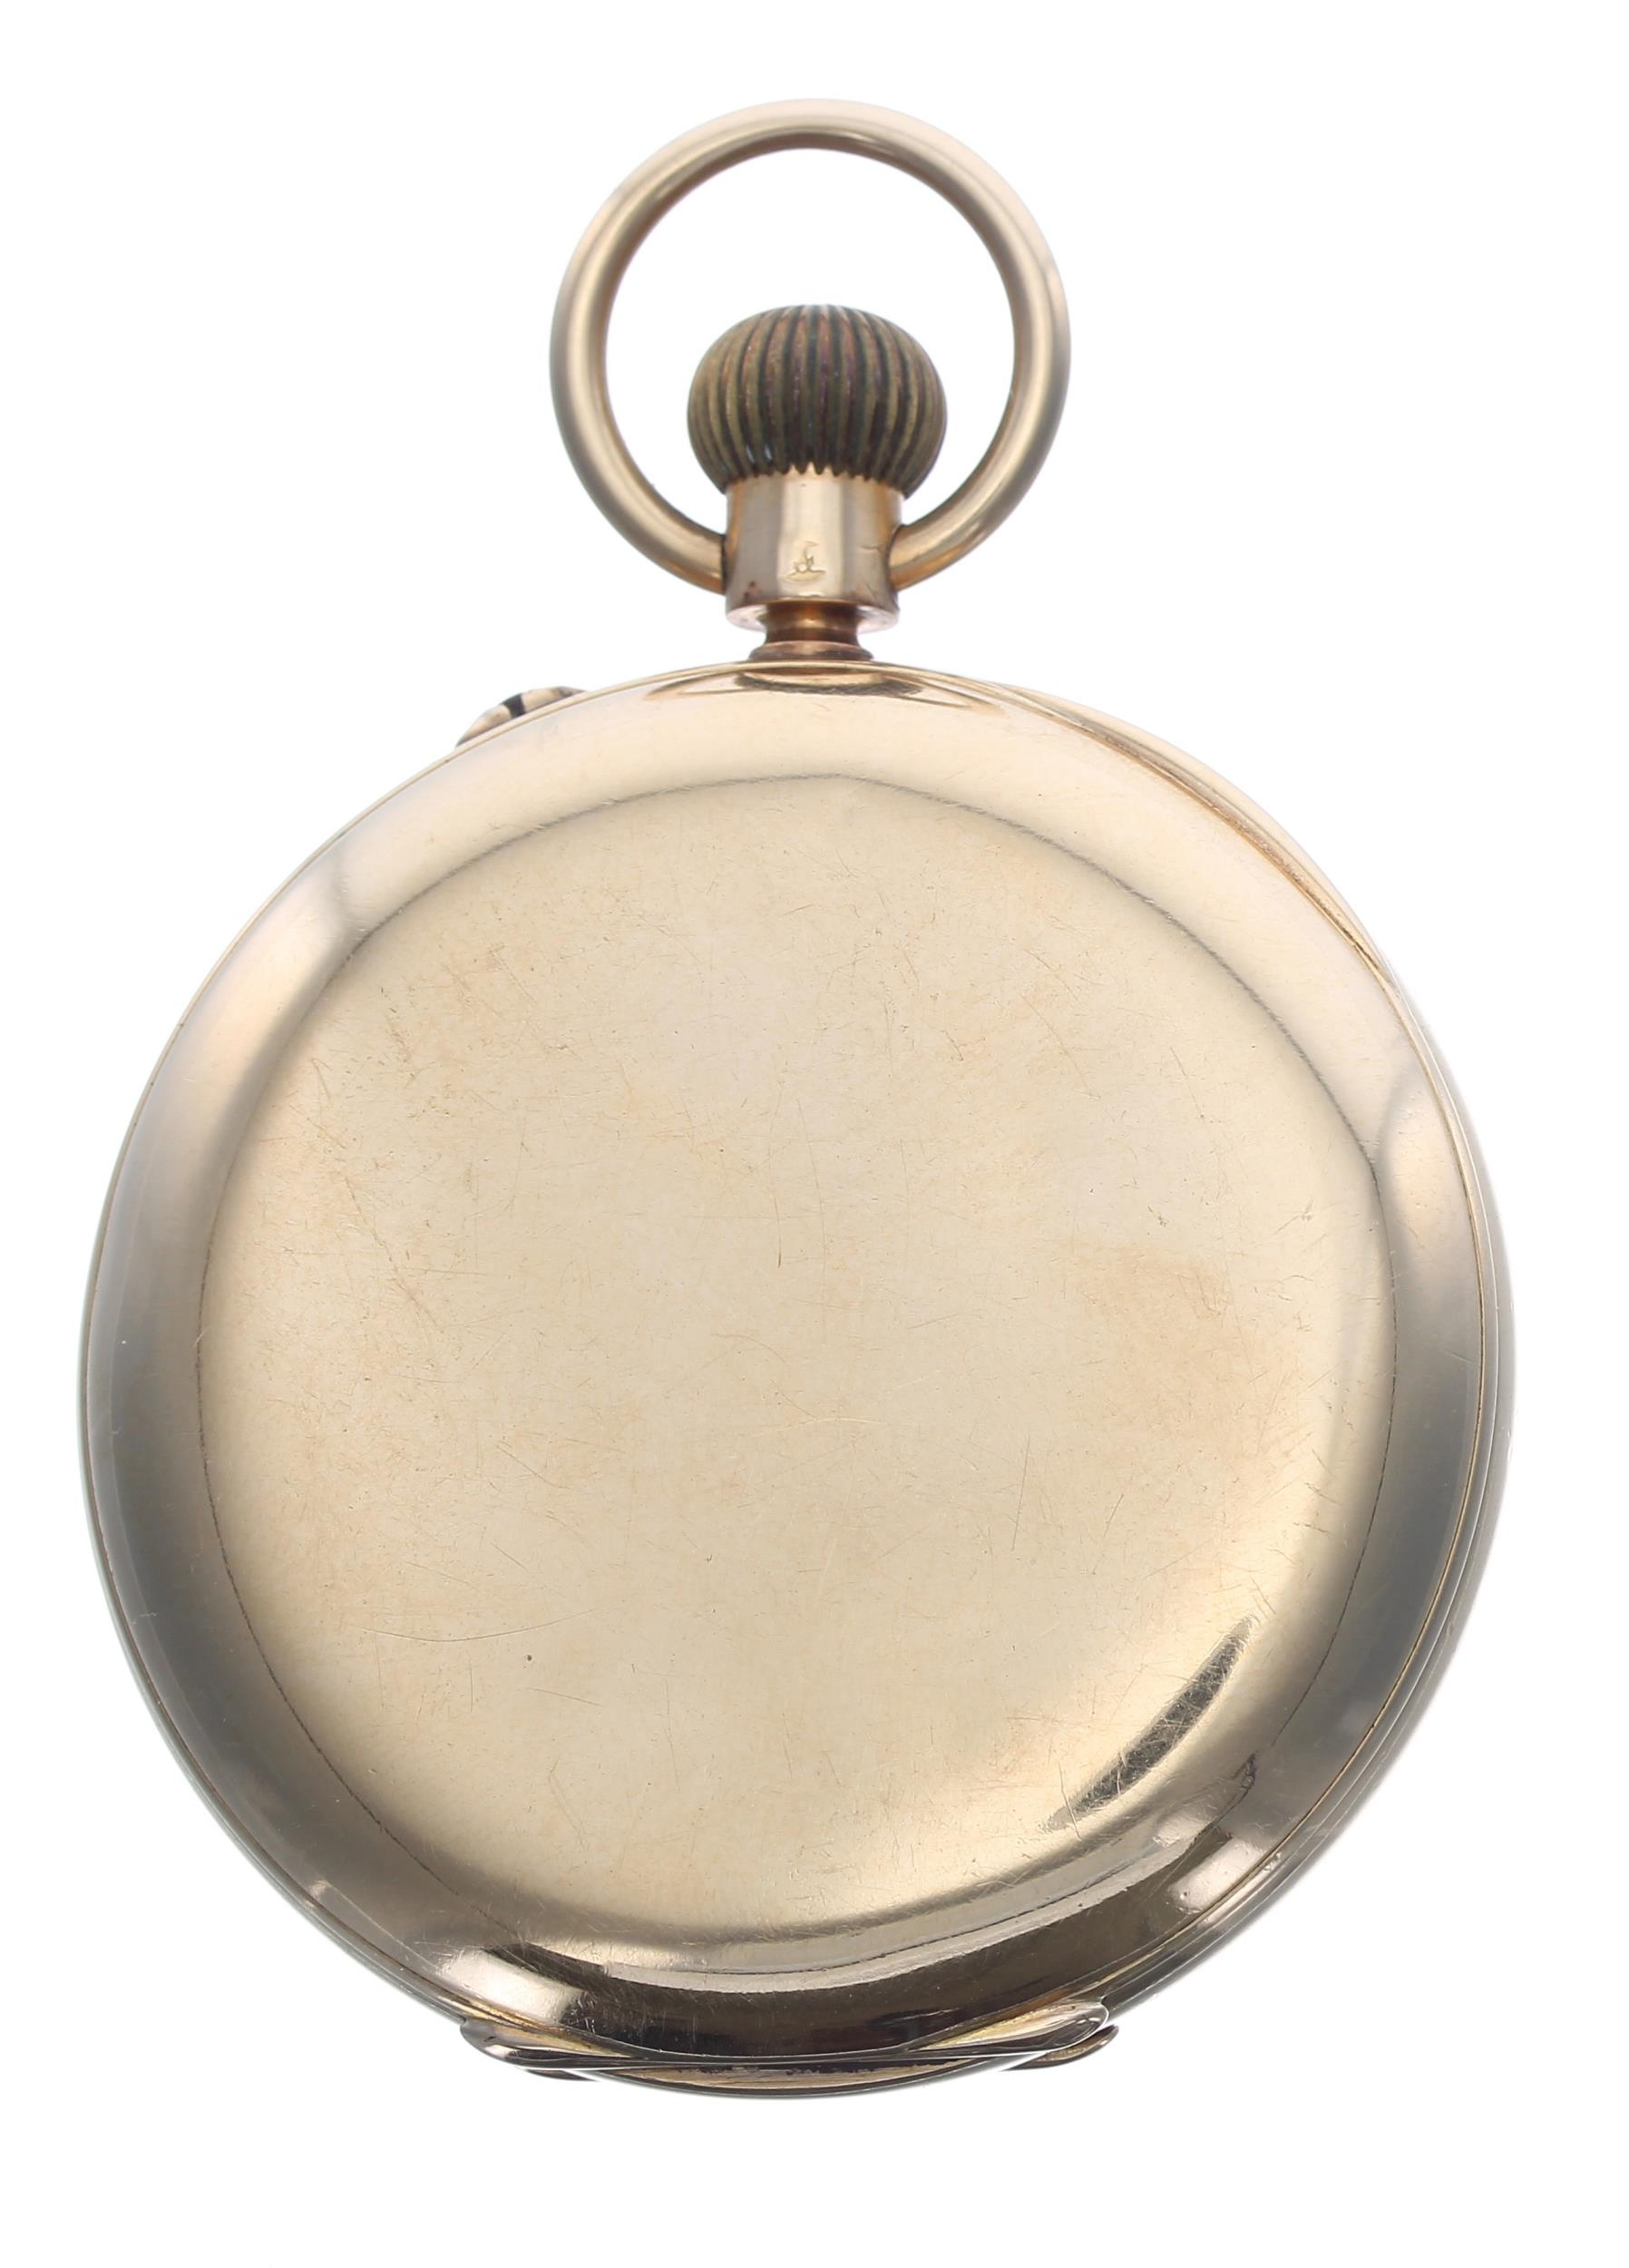 Late 19th century Bryer & Sons 18ct lever hunter pocket watch, London 1899, gilt three quarter plate - Image 3 of 5